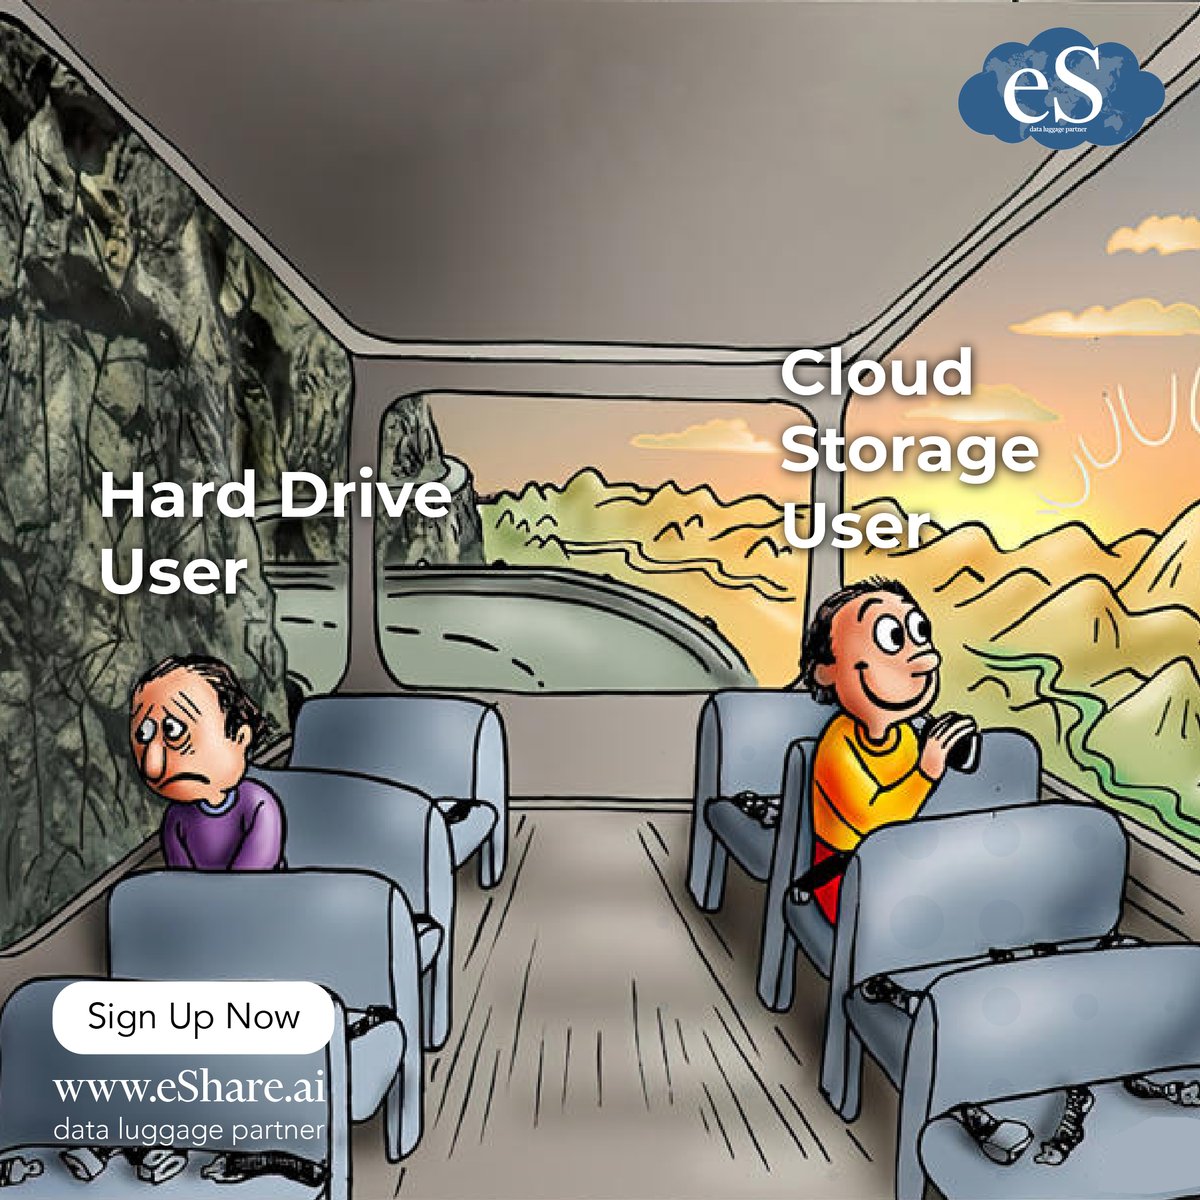 Which do you prefer: storing files on a hard drive or in the cloud?

Connect Now: eshare.ai

#datastorage #technologyhumor #tuesdaymemes #memes #memesdaily #memes4ever #memes4life #memestragram #CloudStorage #harddrive #eshareai